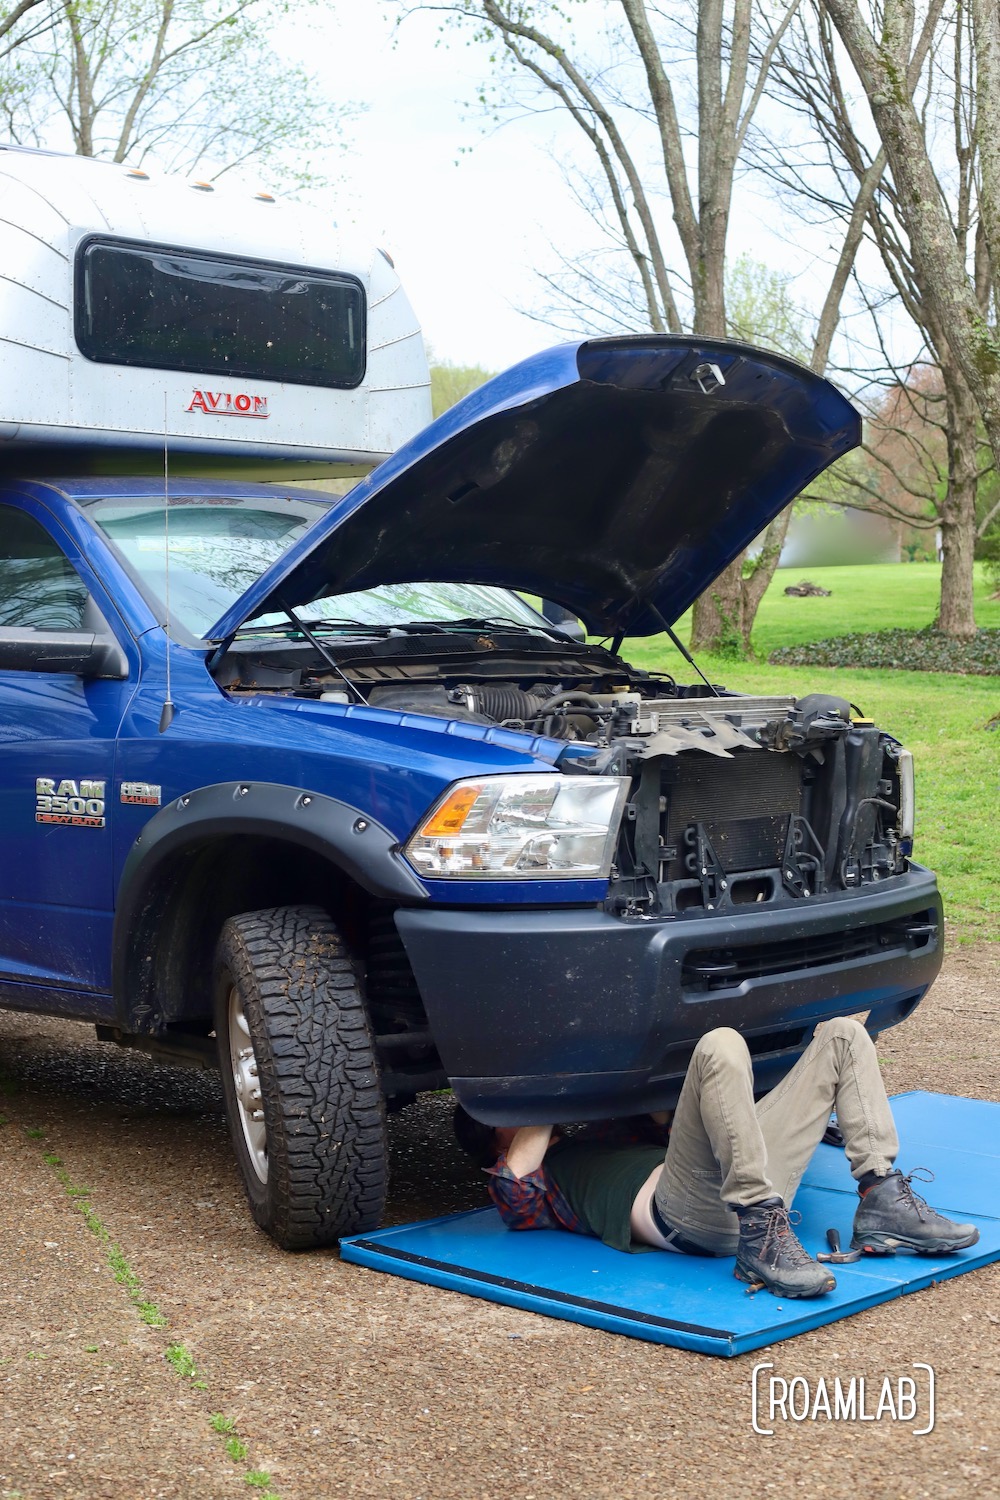 We expand our automotive mechanic skills with our latest DIY project: removing the front bumper of our 2015 Ram 3500 Tradesman truck